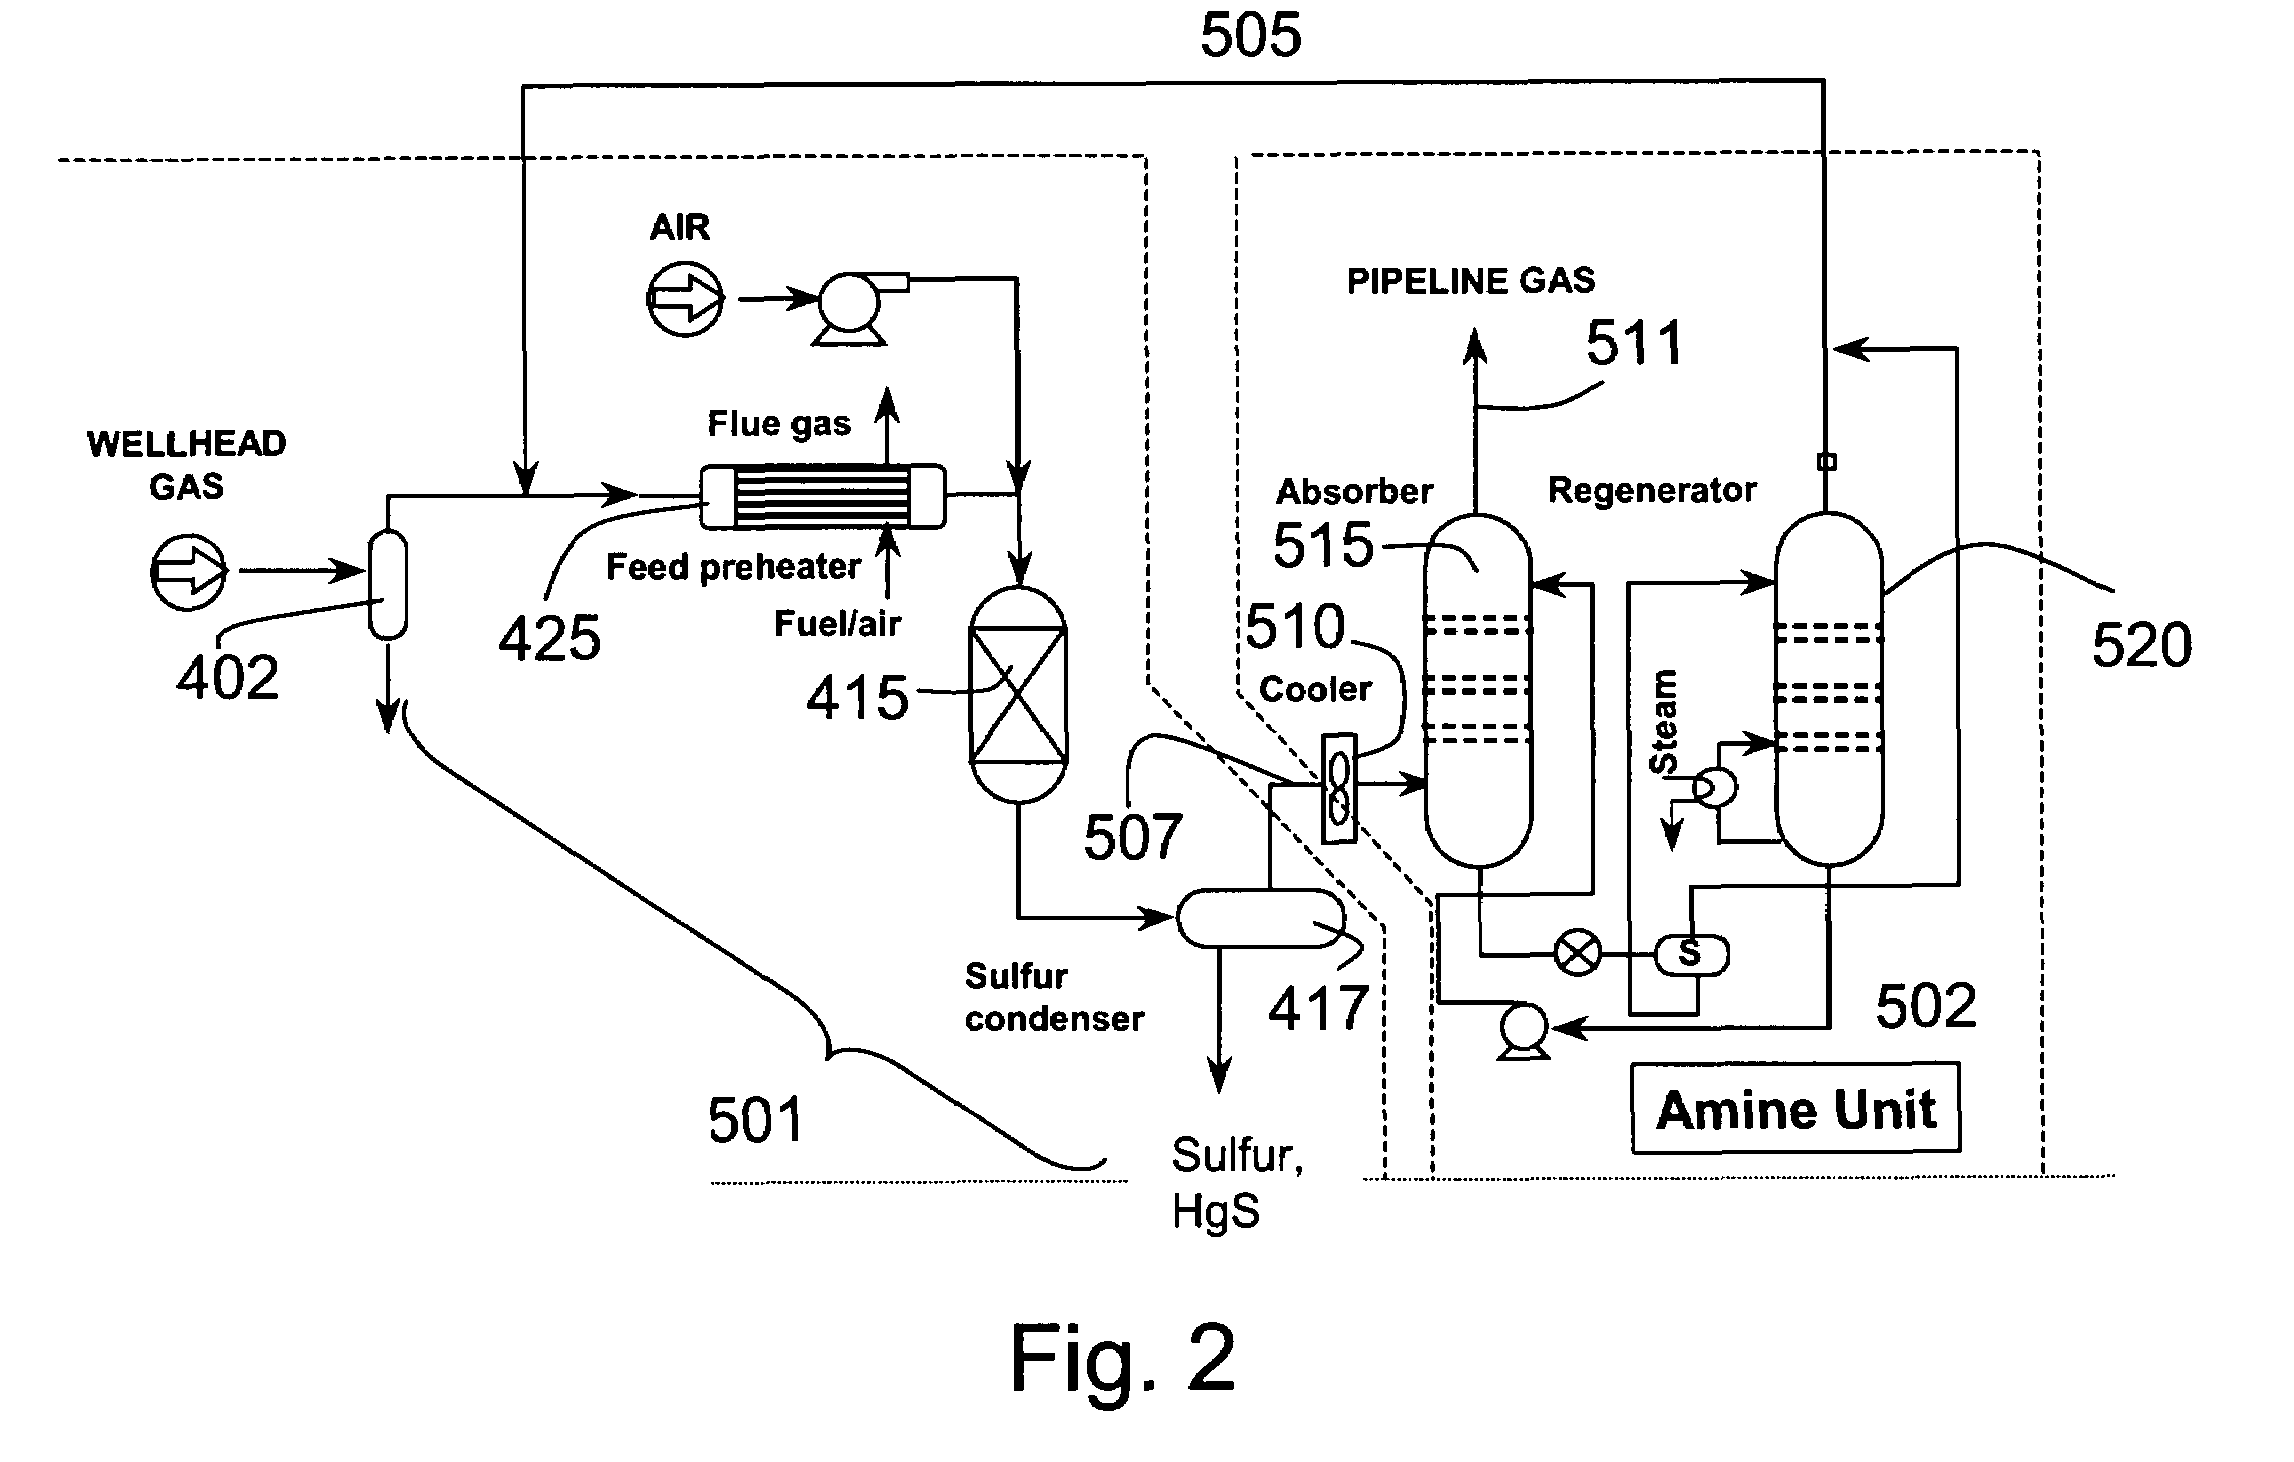 Process for the simultaneous removal of sulfur and mercury